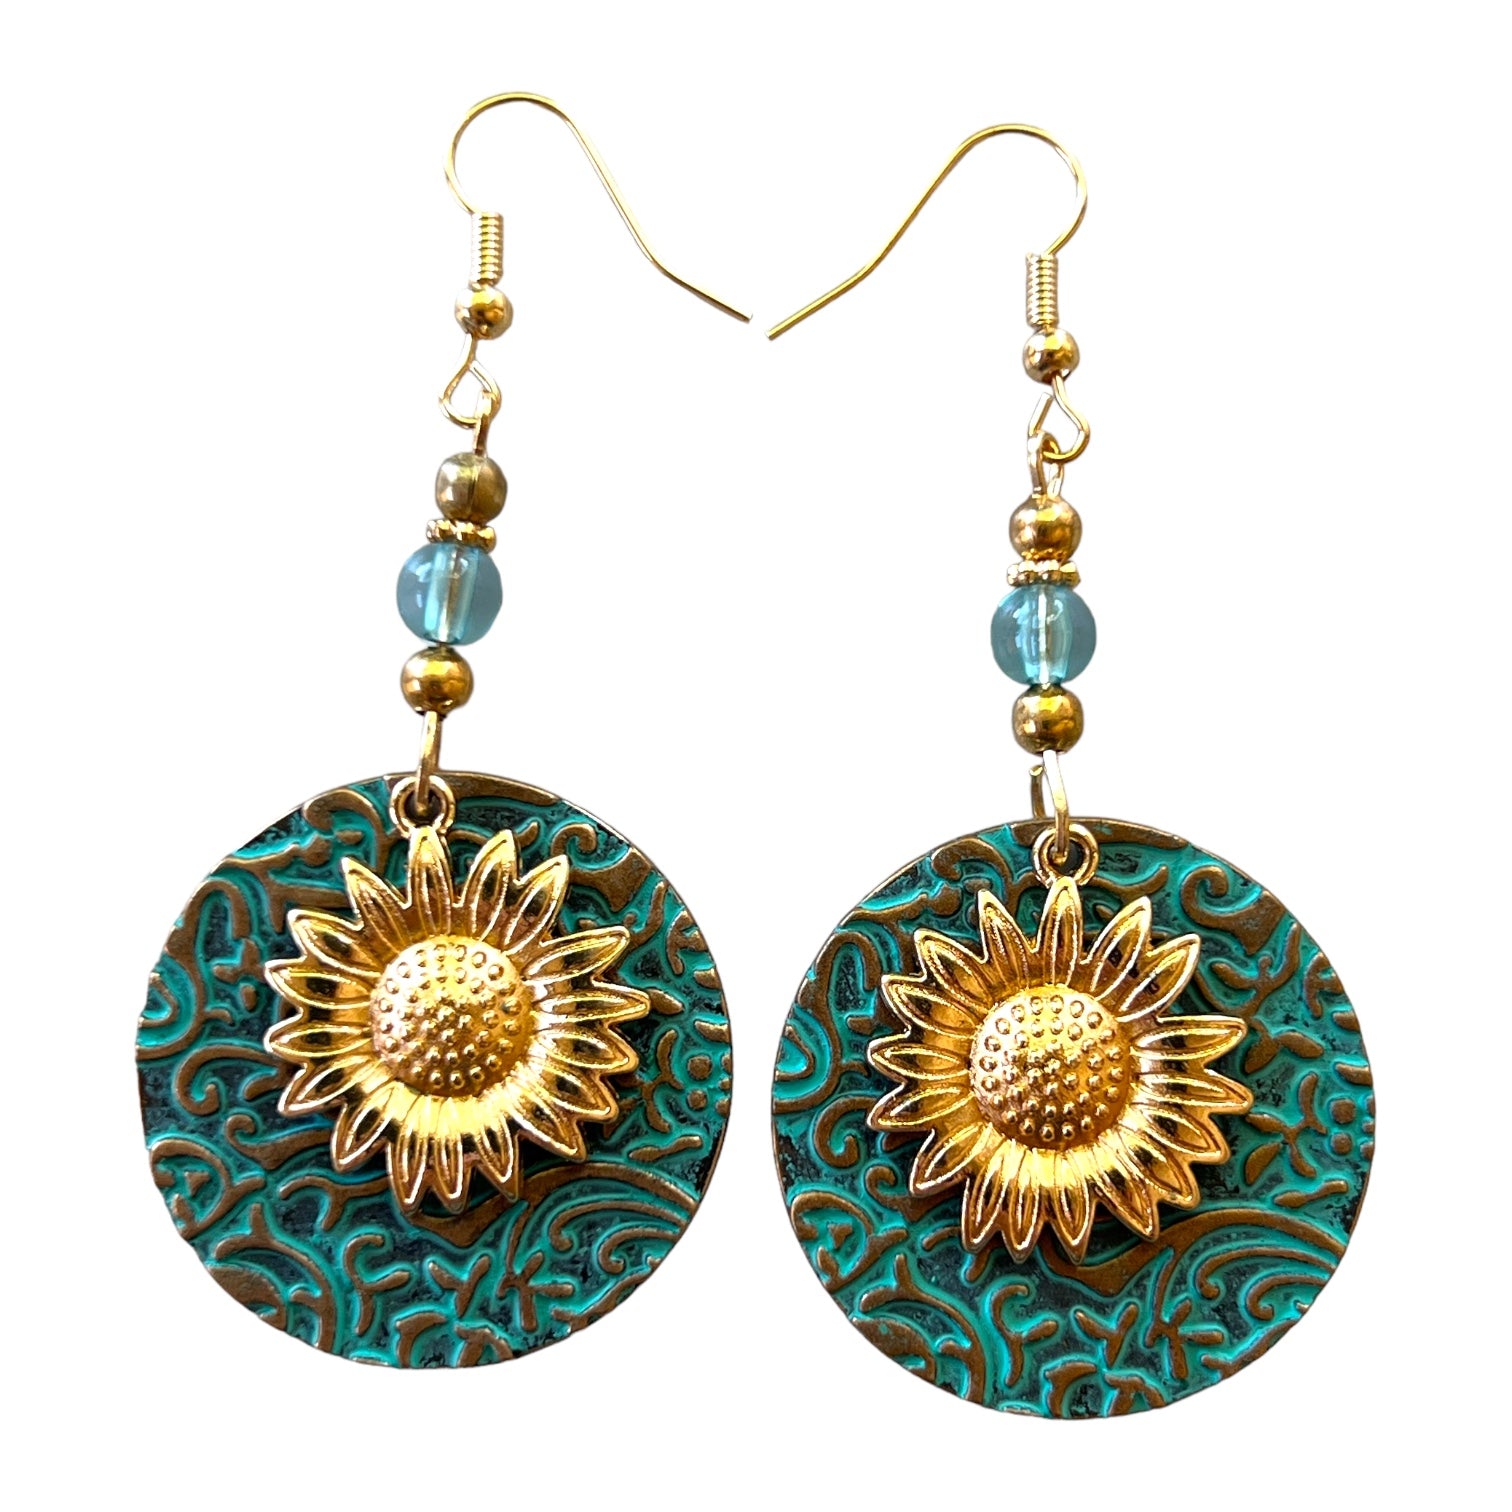 Round Patina Metal Earrings with Gold Sunflower: Unique Dangle Accessories